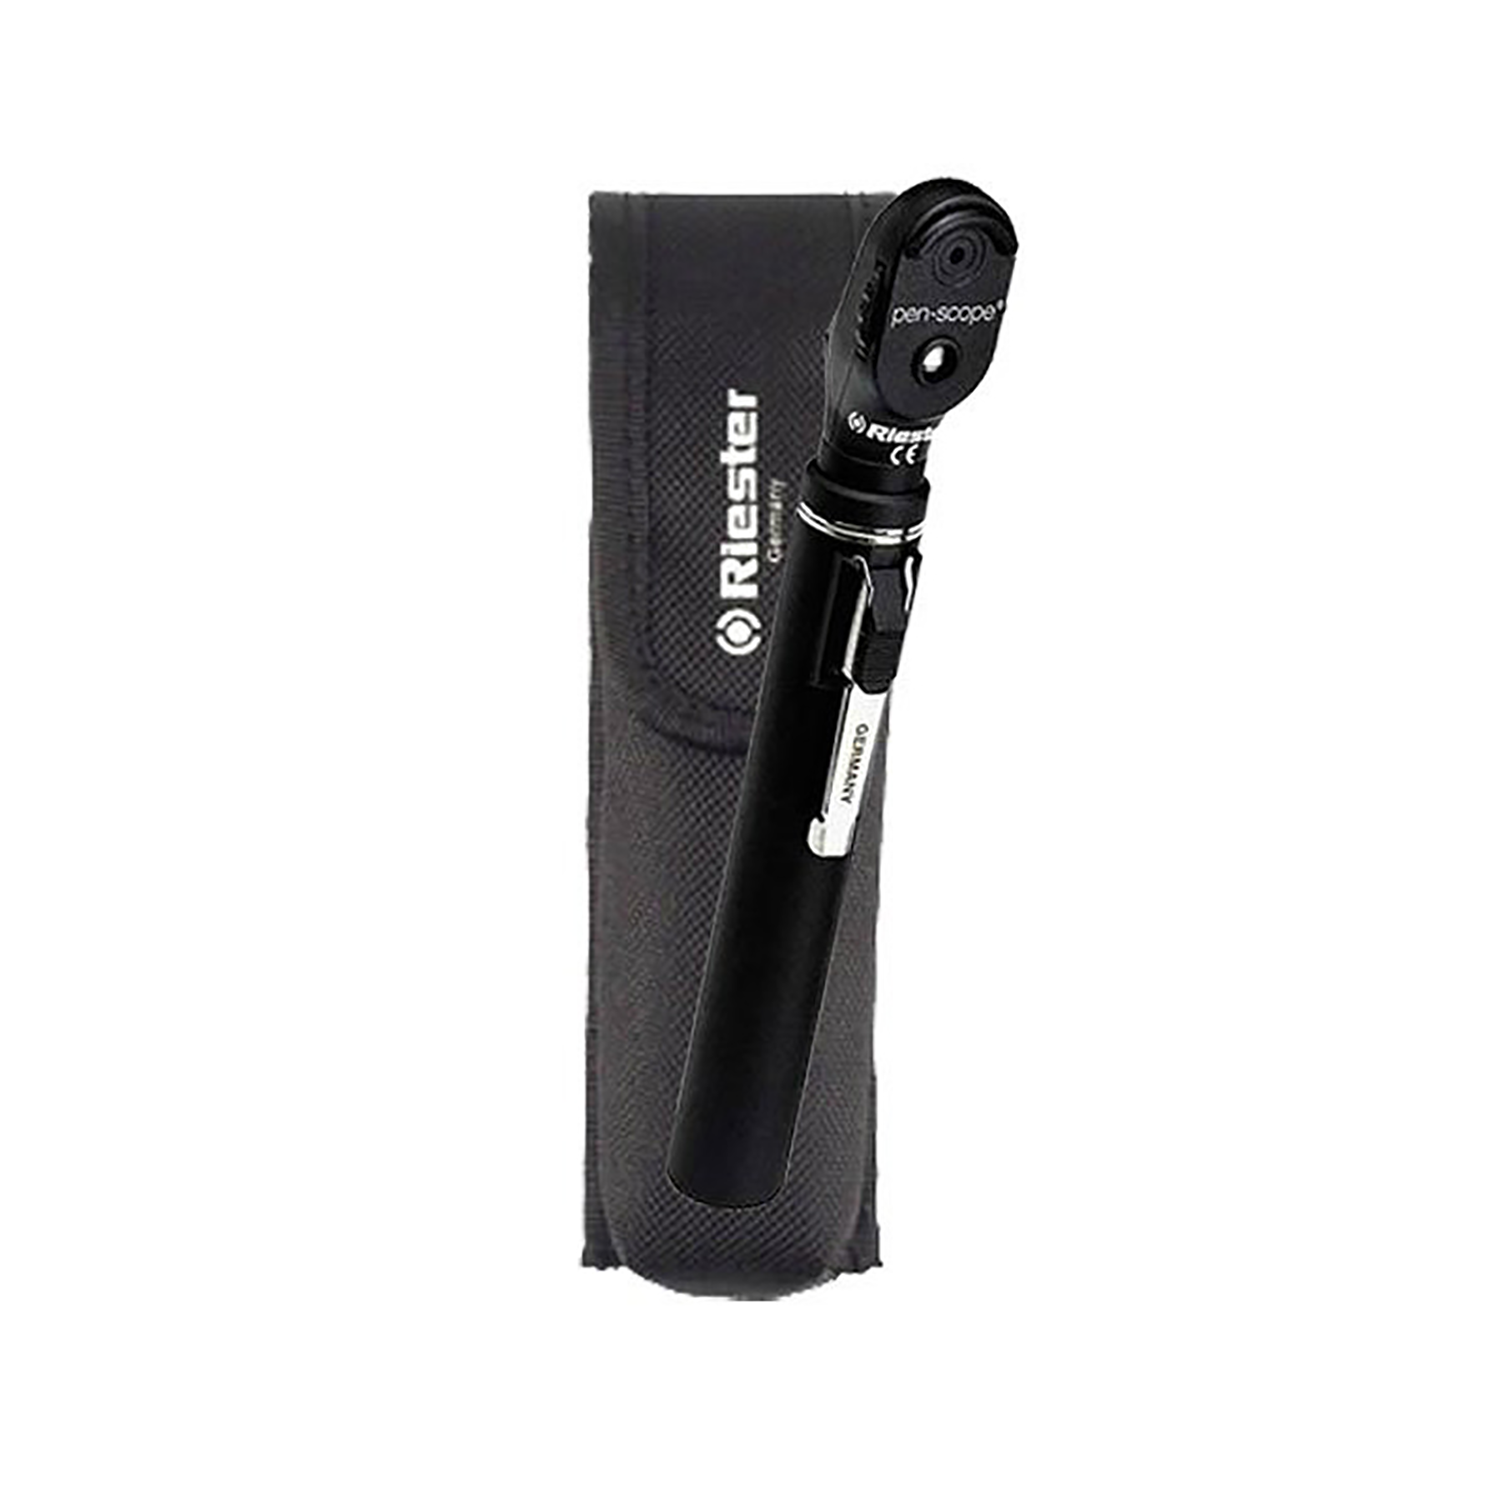 Riester Penscope Ophthalmoscope | 2.5V | Black